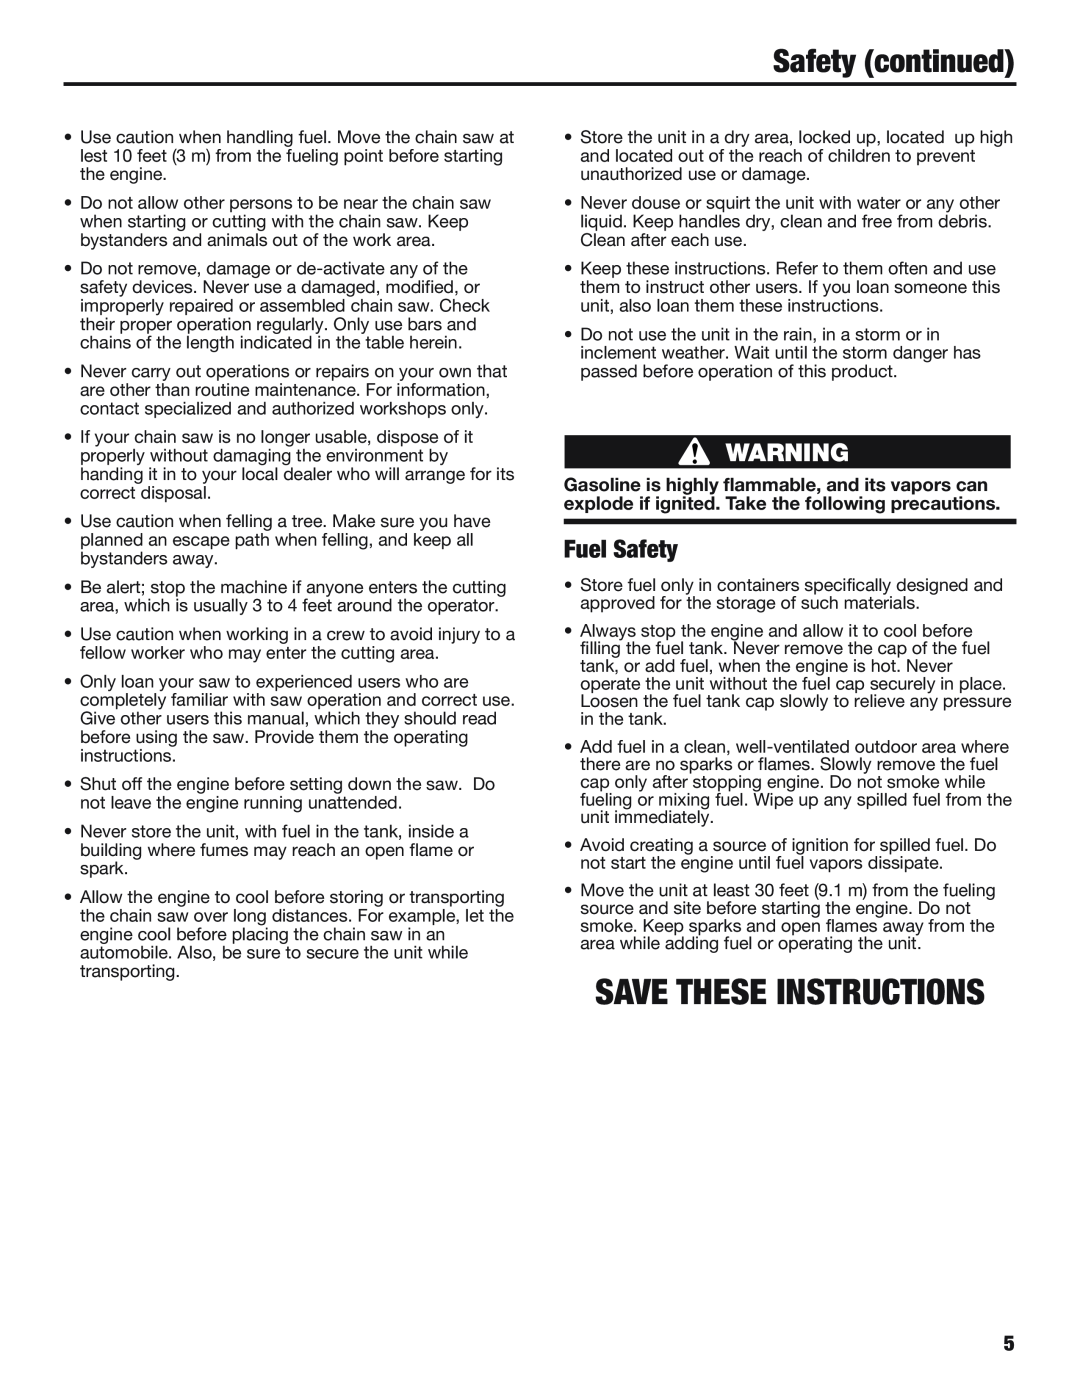 Cub Cadet CS5720 manual Fuel Safety, Save These Instructions, Safety continued 